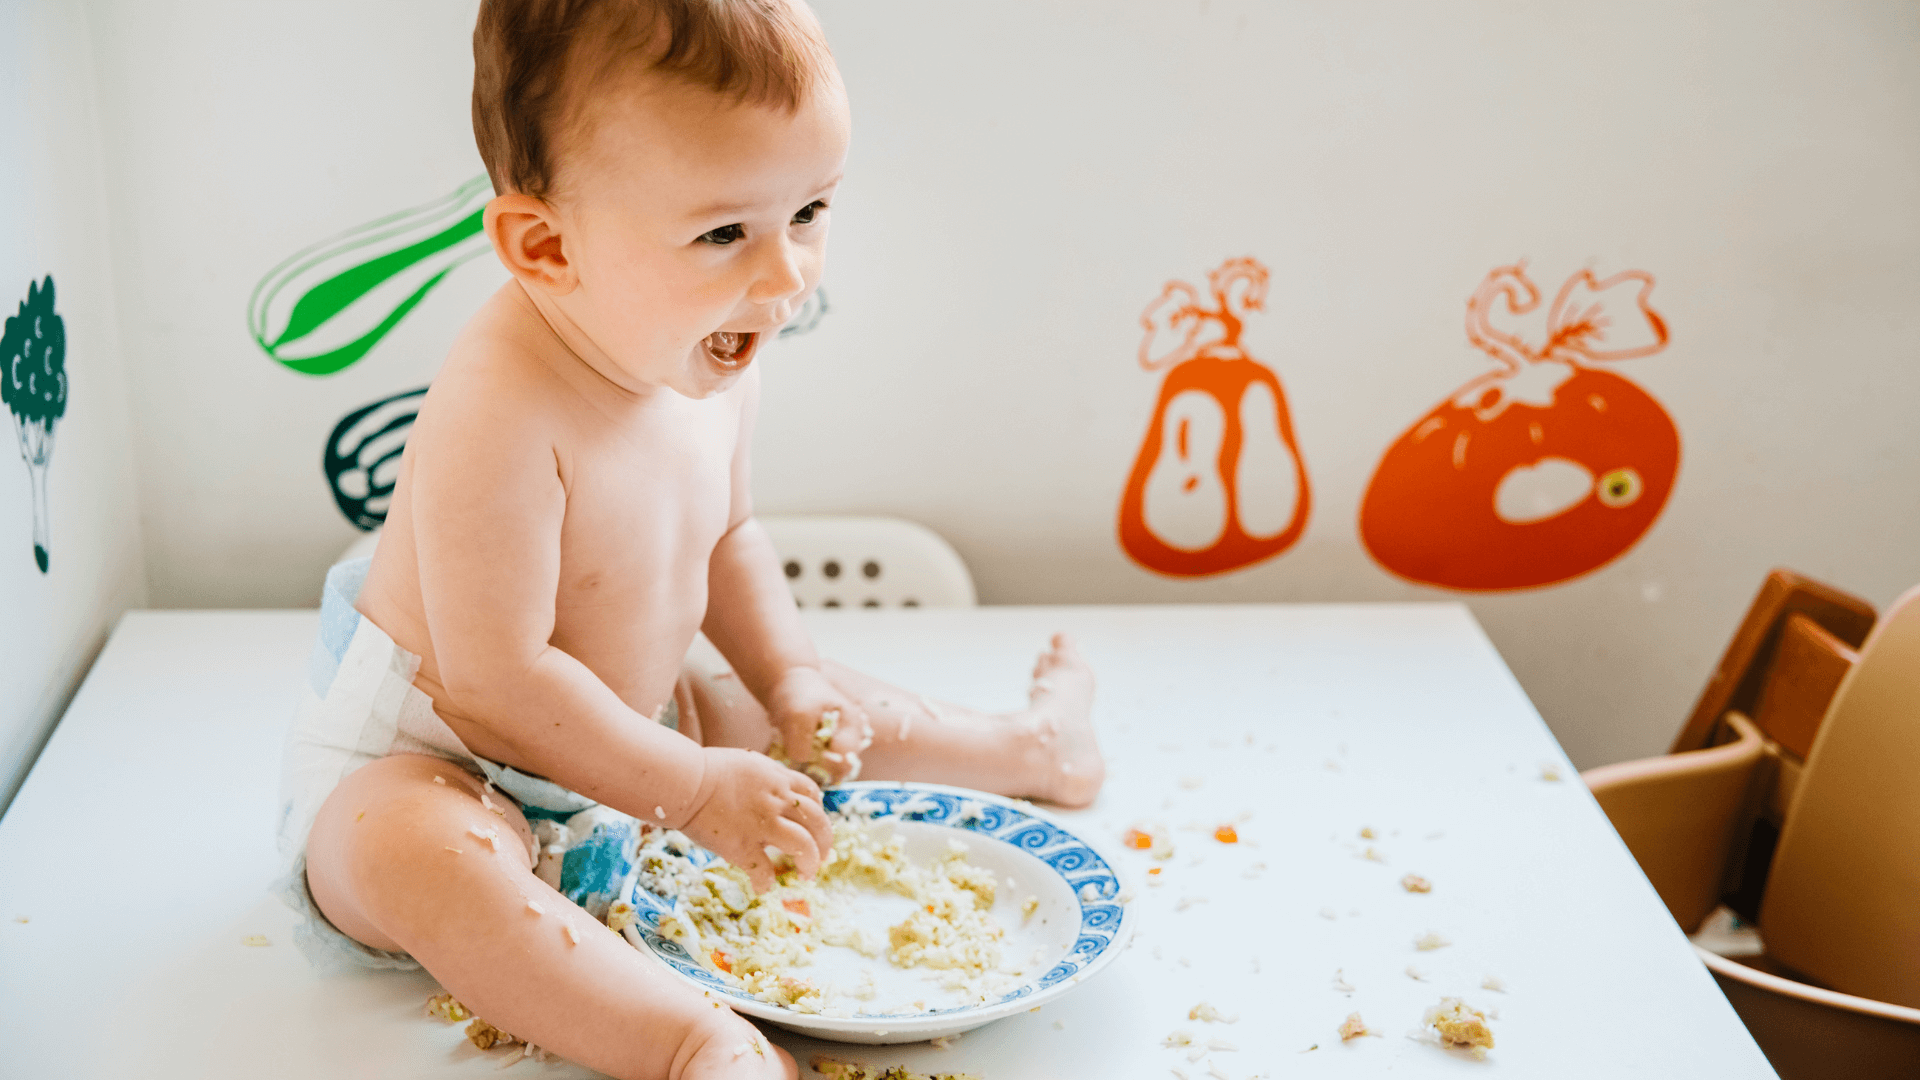 A Parent's Guide to Food Additives in Your Baby’s Diet